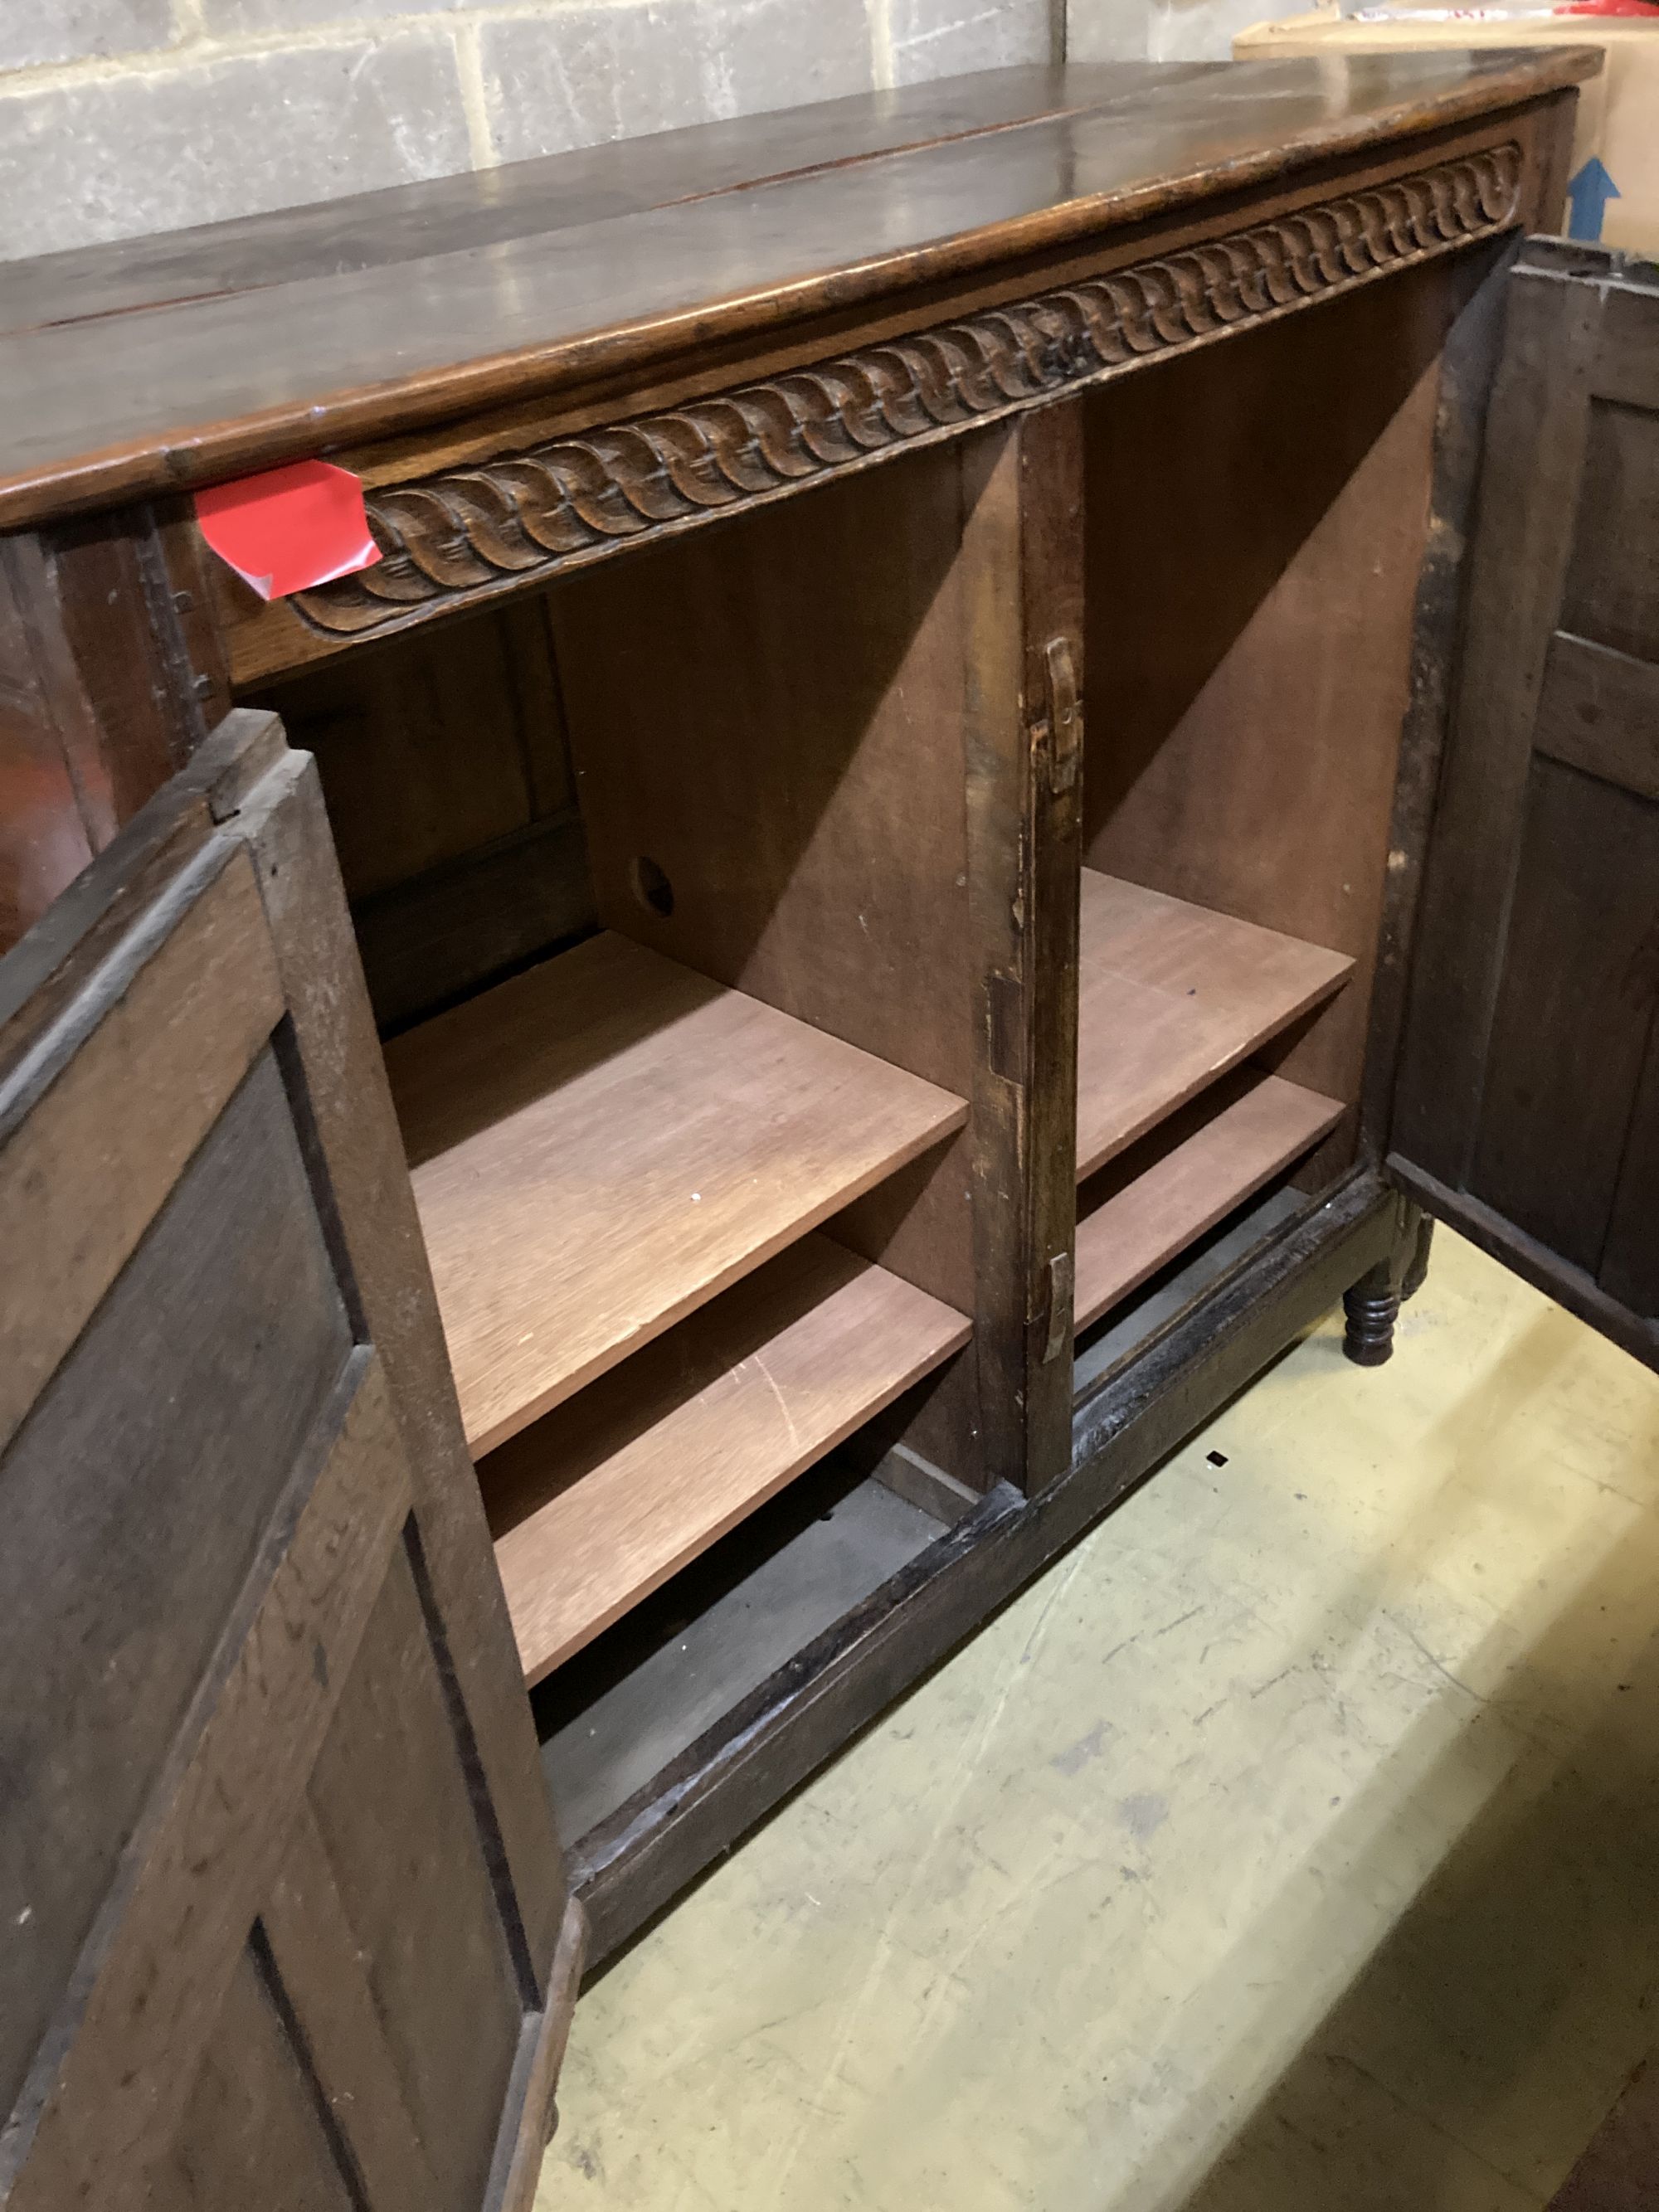 An 18th century panelled oak Livery cupboard (adapted), width 130cm, depth 57cm, height 128cm